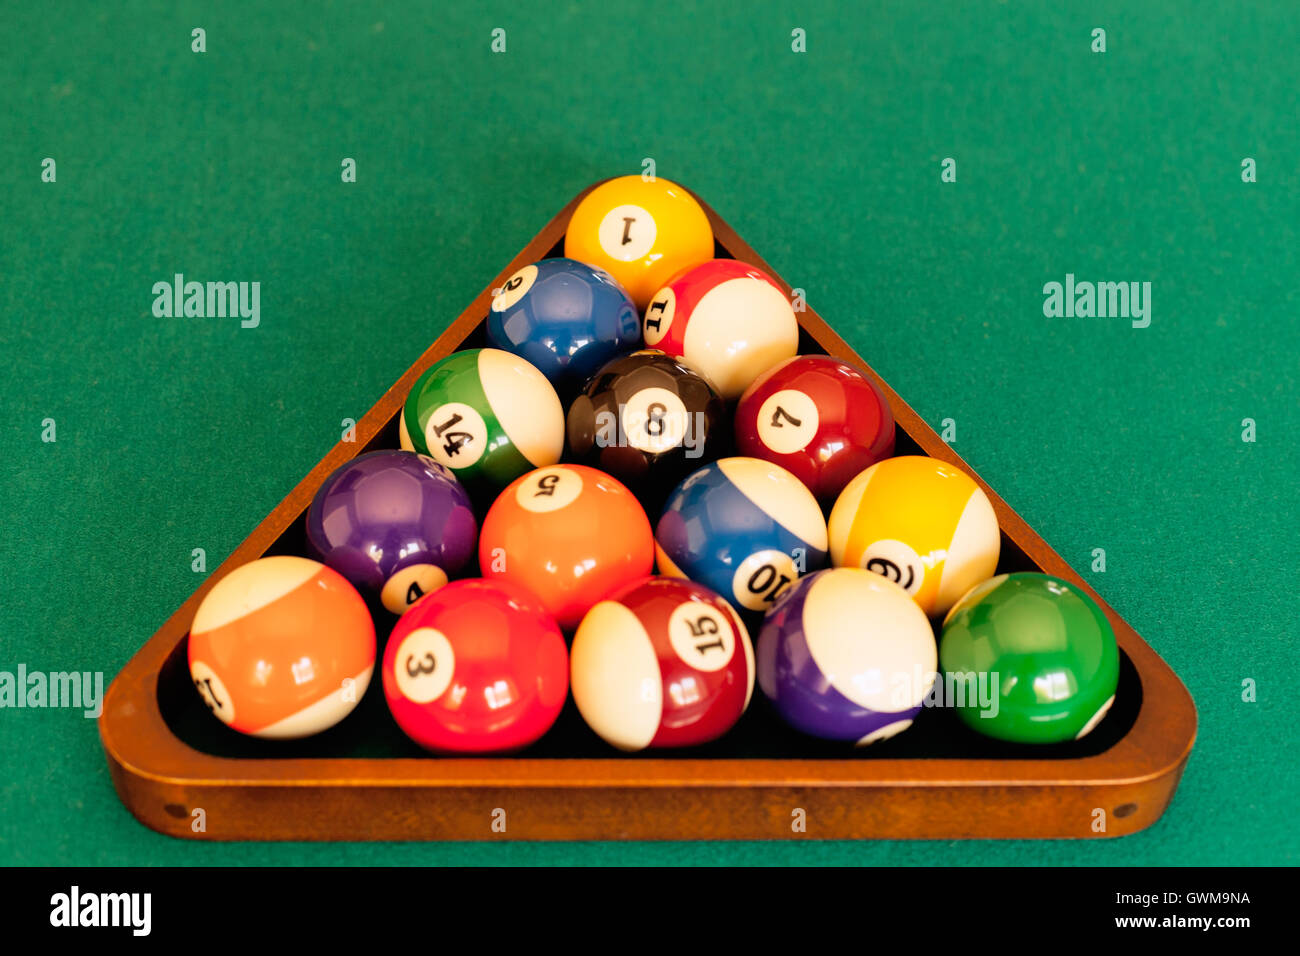 Pool balls ordered in a rack ready for a game of eight-ball pool Stock  Photo - Alamy